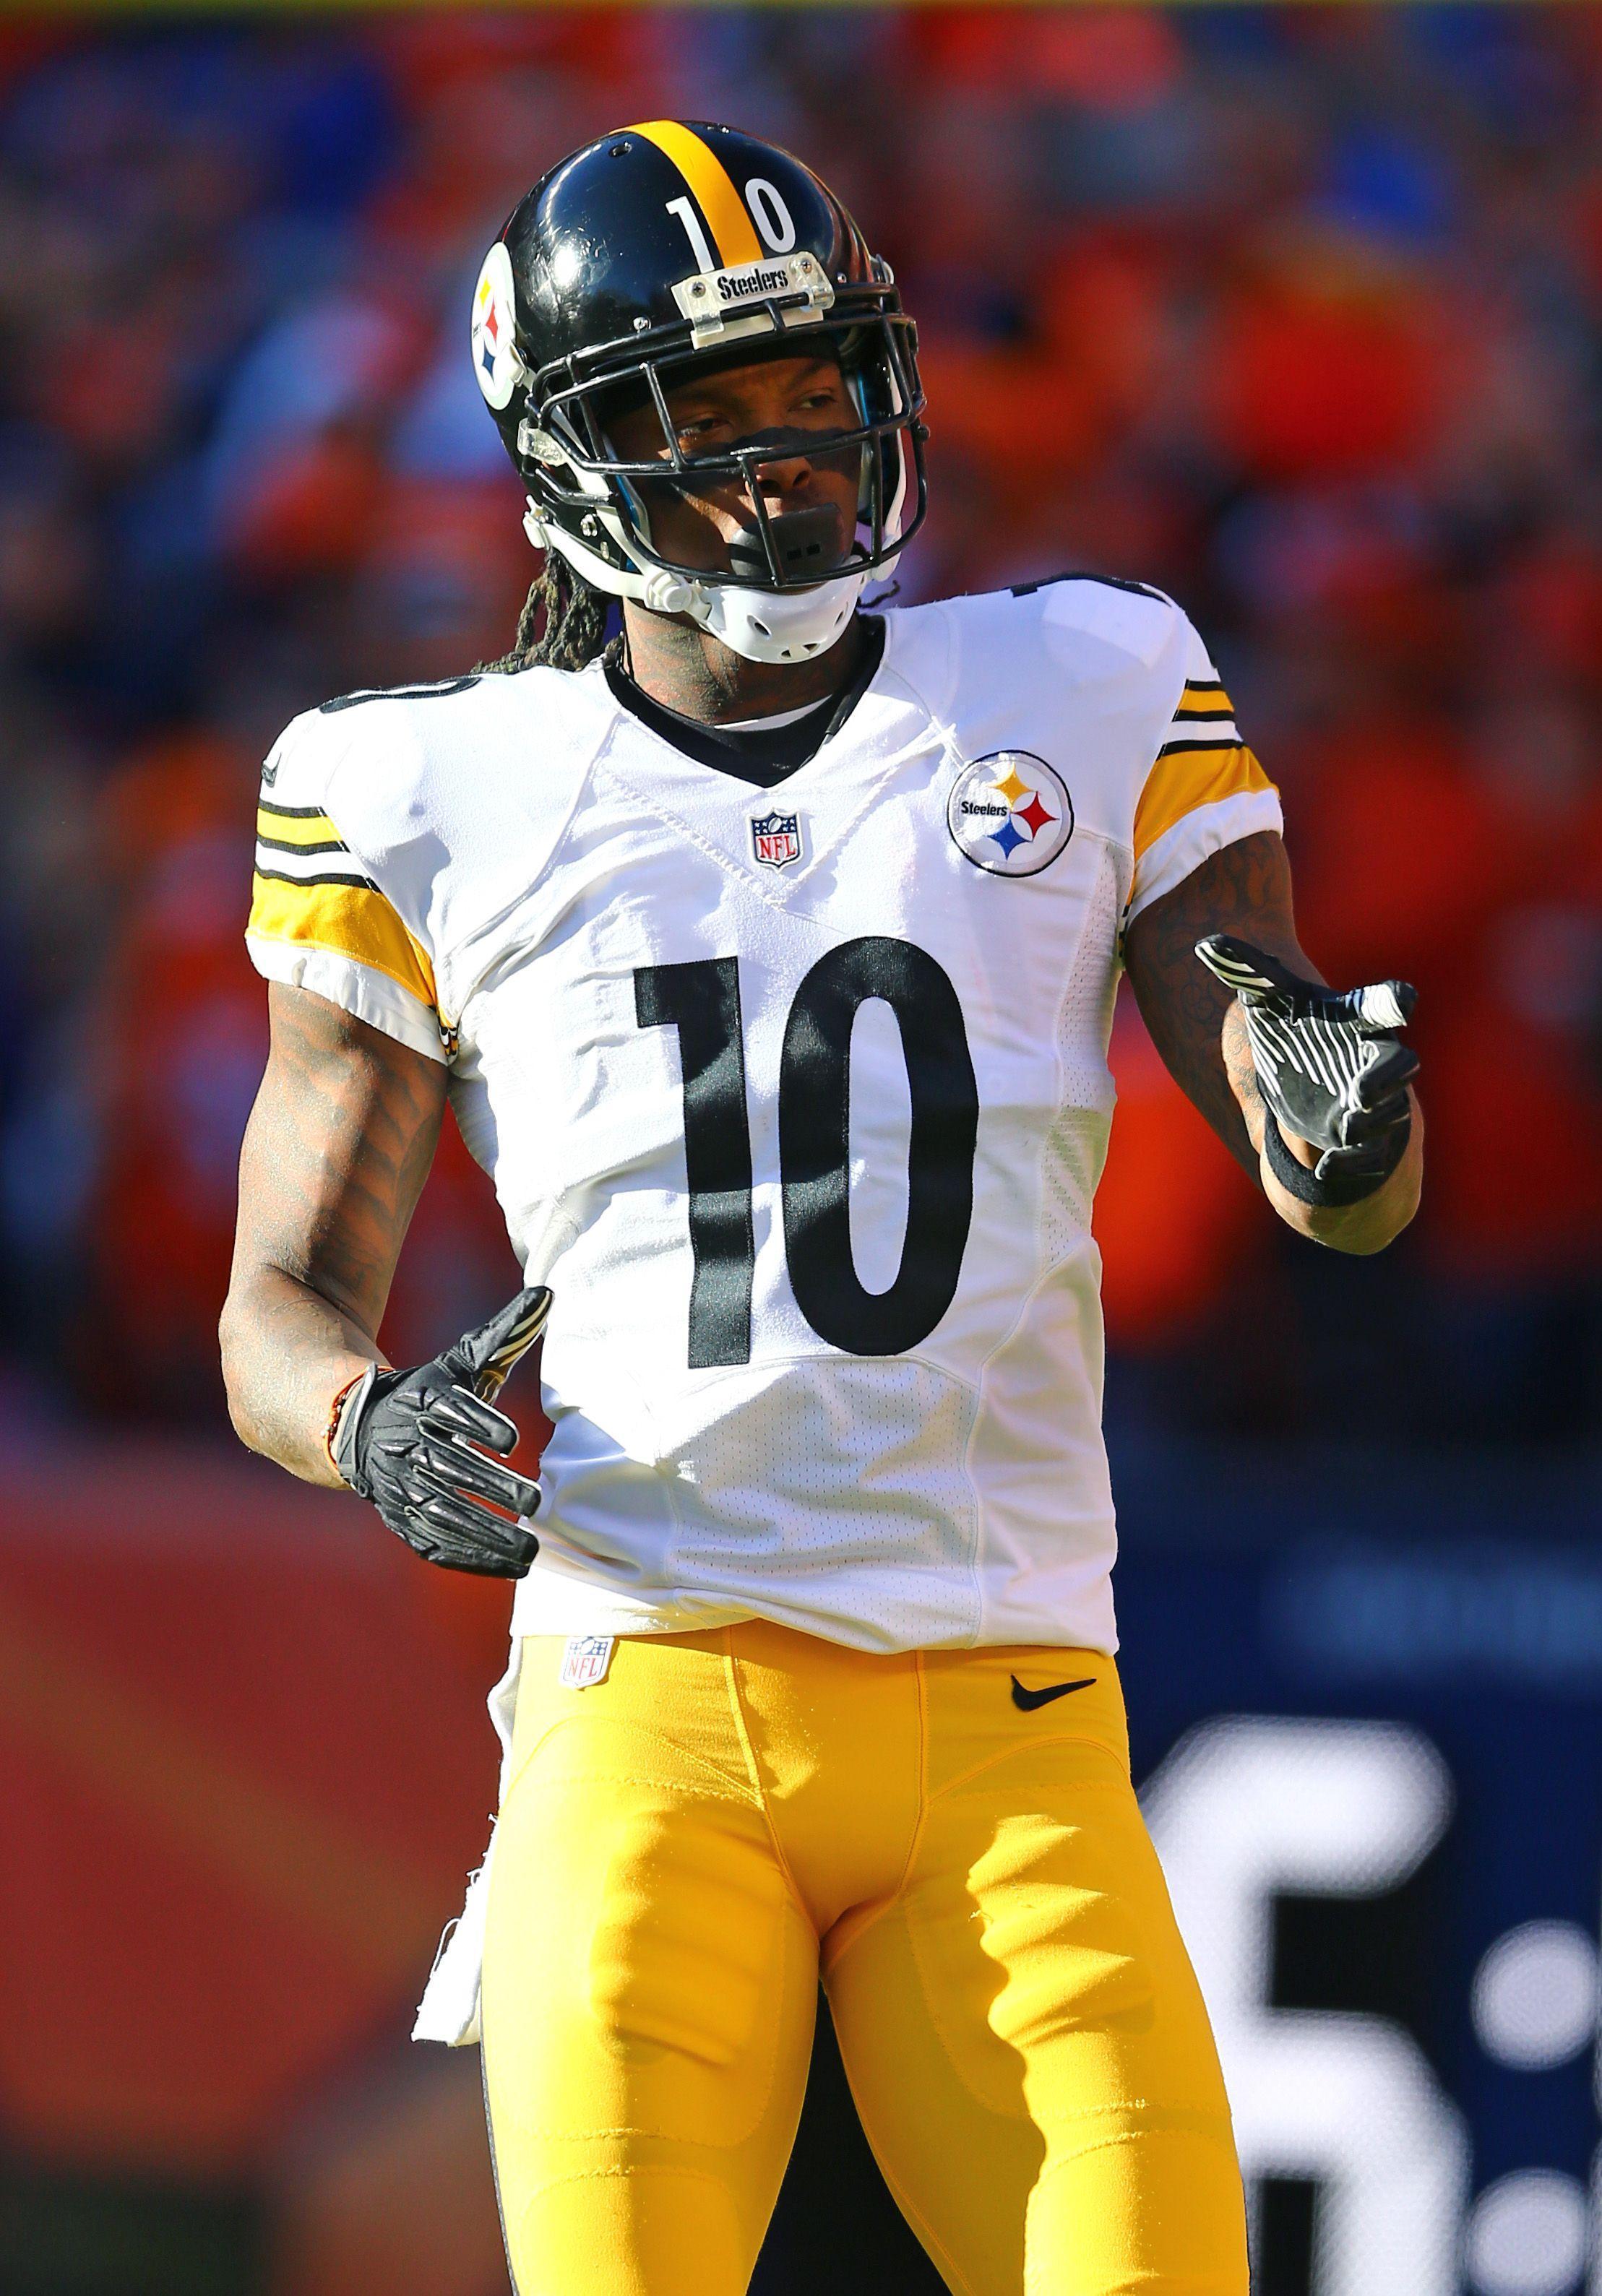 Report: Steelers expect Martavis Bryant to be fully reinstated